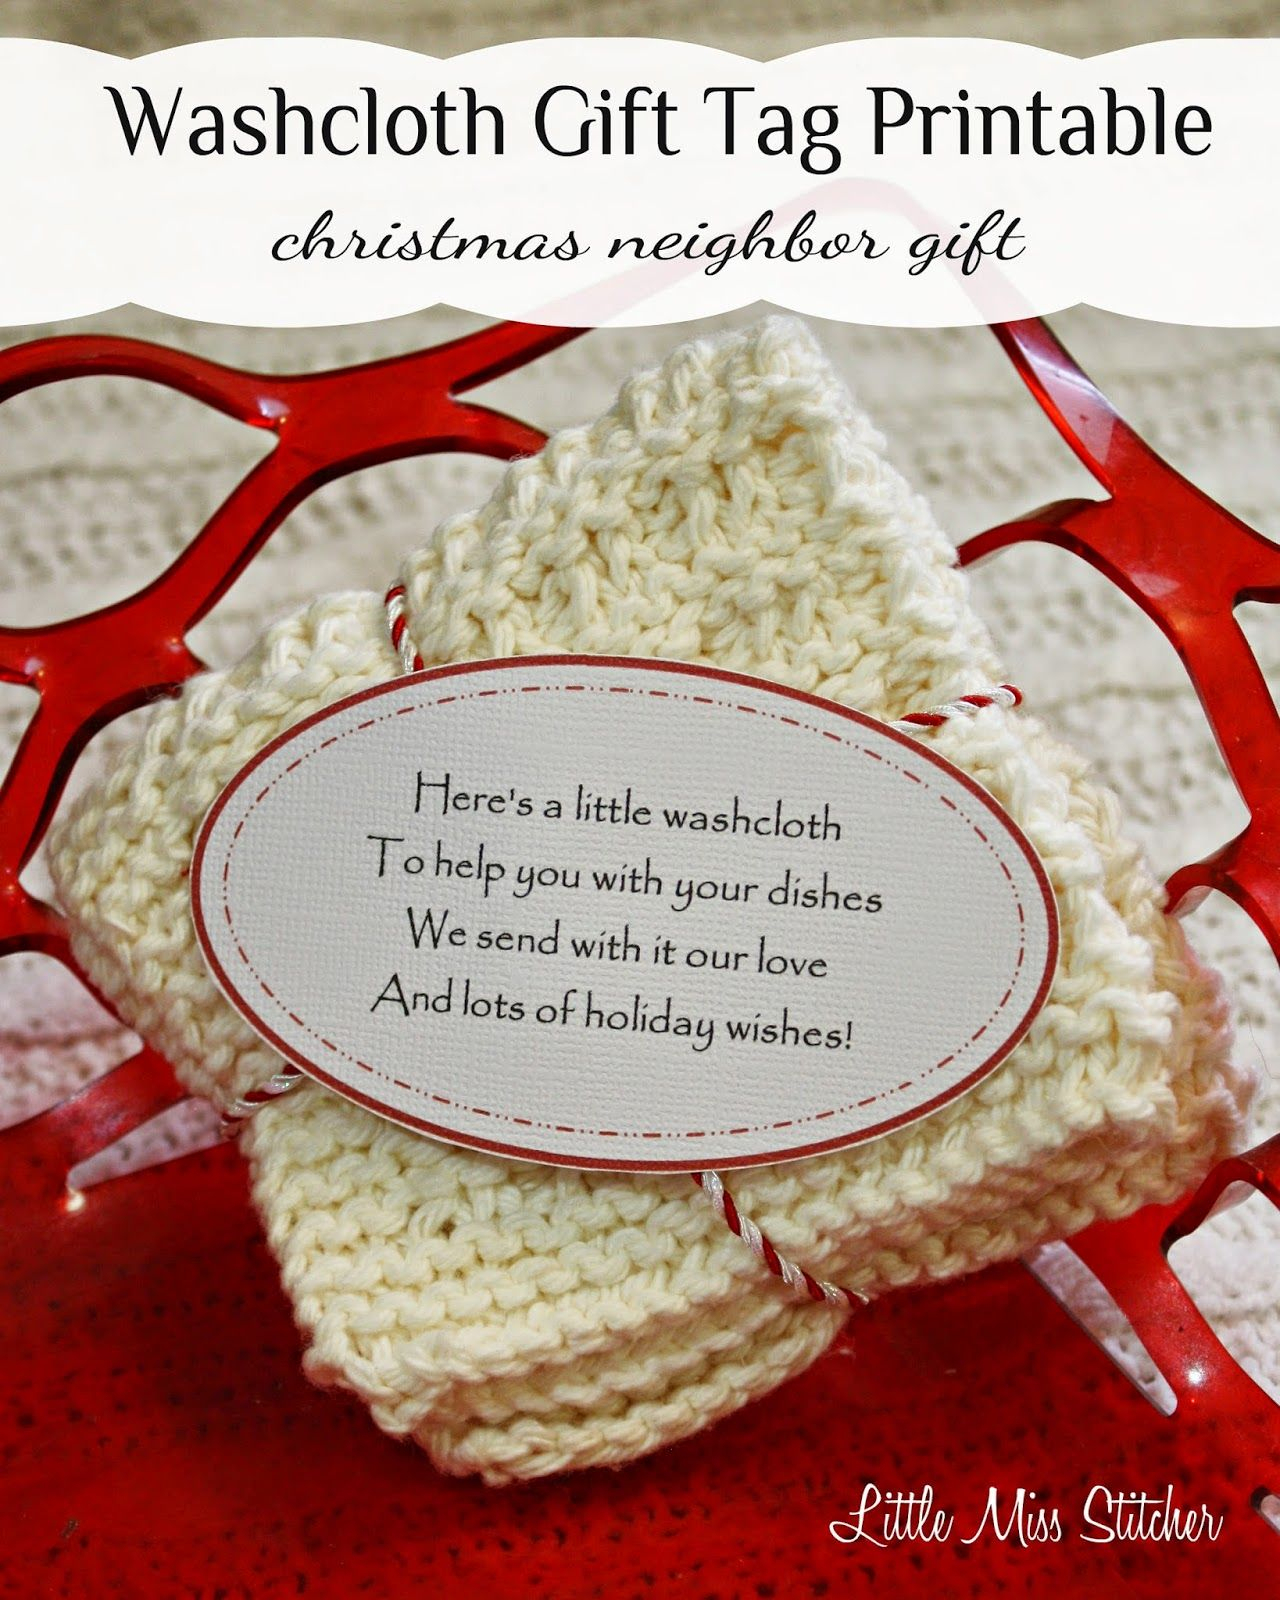 Washcloth Gift Idea For Christmas.the Cute Poem On These Free - Free Printable Dishcloth Wrappers